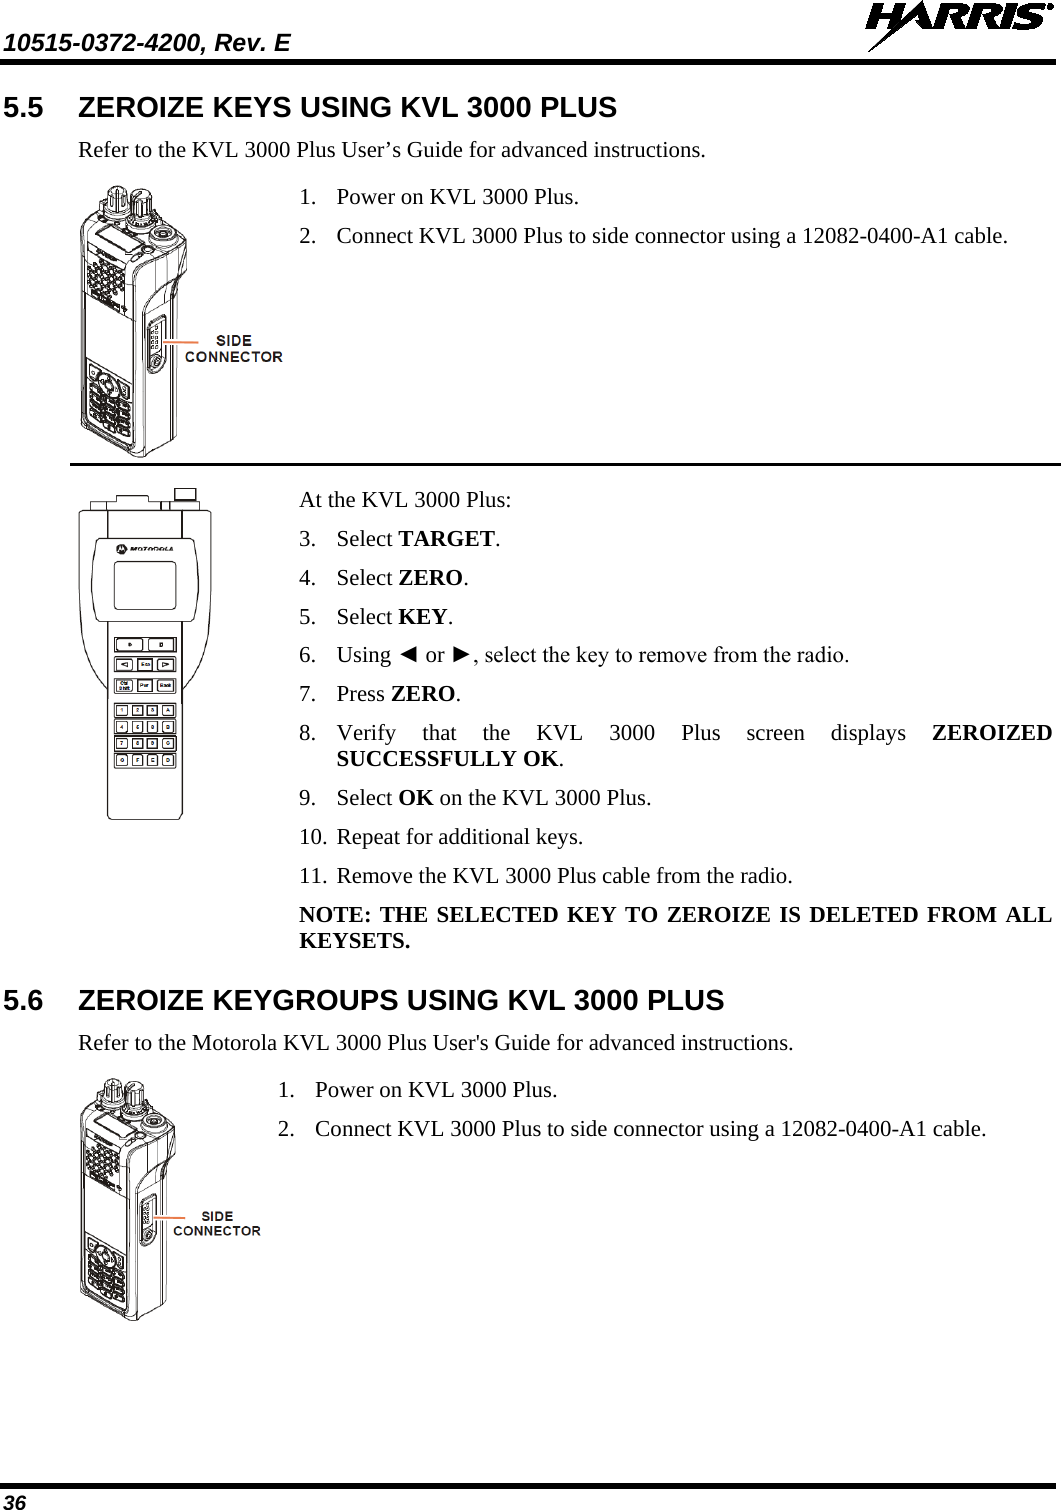 10515-0372-4200, Rev. E   36 5.5 ZEROIZE KEYS USING KVL 3000 PLUS Refer to the KVL 3000 Plus User’s Guide for advanced instructions.  1. Power on KVL 3000 Plus. 2. Connect KVL 3000 Plus to side connector using a 12082-0400-A1 cable.  At the KVL 3000 Plus: 3. Select TARGET. 4. Select ZERO. 5. Select KEY. 6. Using ◄ or ►, select the key to remove from the radio. 7. Press ZERO. 8. Verify that the KVL 3000 Plus screen displays ZEROIZED SUCCESSFULLY OK.  9. Select OK on the KVL 3000 Plus. 10. Repeat for additional keys. 11. Remove the KVL 3000 Plus cable from the radio. NOTE: THE SELECTED KEY TO ZEROIZE IS DELETED FROM ALL KEYSETS. 5.6 ZEROIZE KEYGROUPS USING KVL 3000 PLUS Refer to the Motorola KVL 3000 Plus User&apos;s Guide for advanced instructions.  1. Power on KVL 3000 Plus. 2. Connect KVL 3000 Plus to side connector using a 12082-0400-A1 cable. 